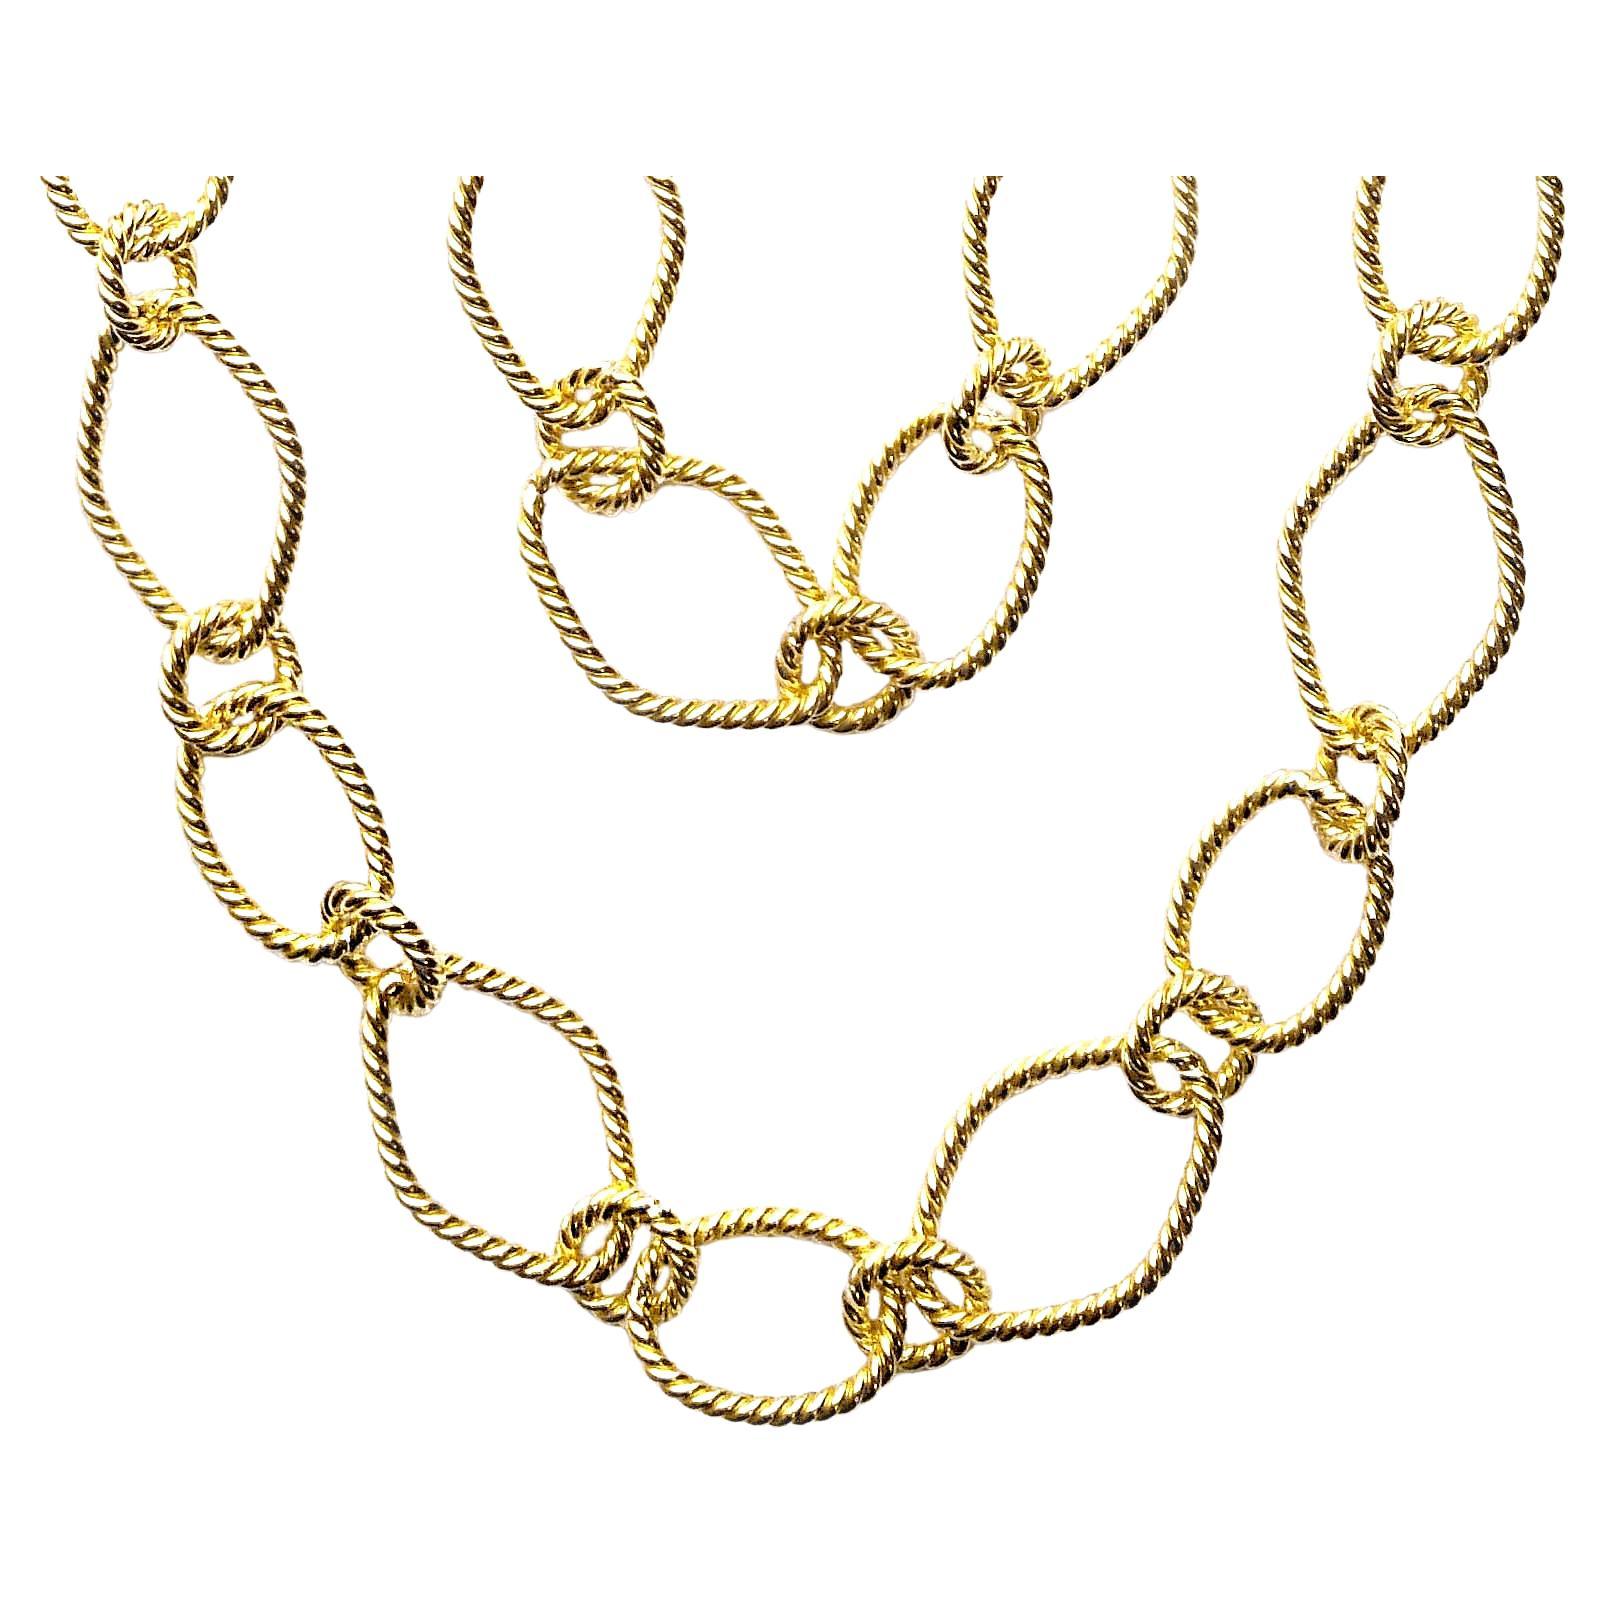 Vitolo 18 Karat Handmade Link Chain Necklace For Sale